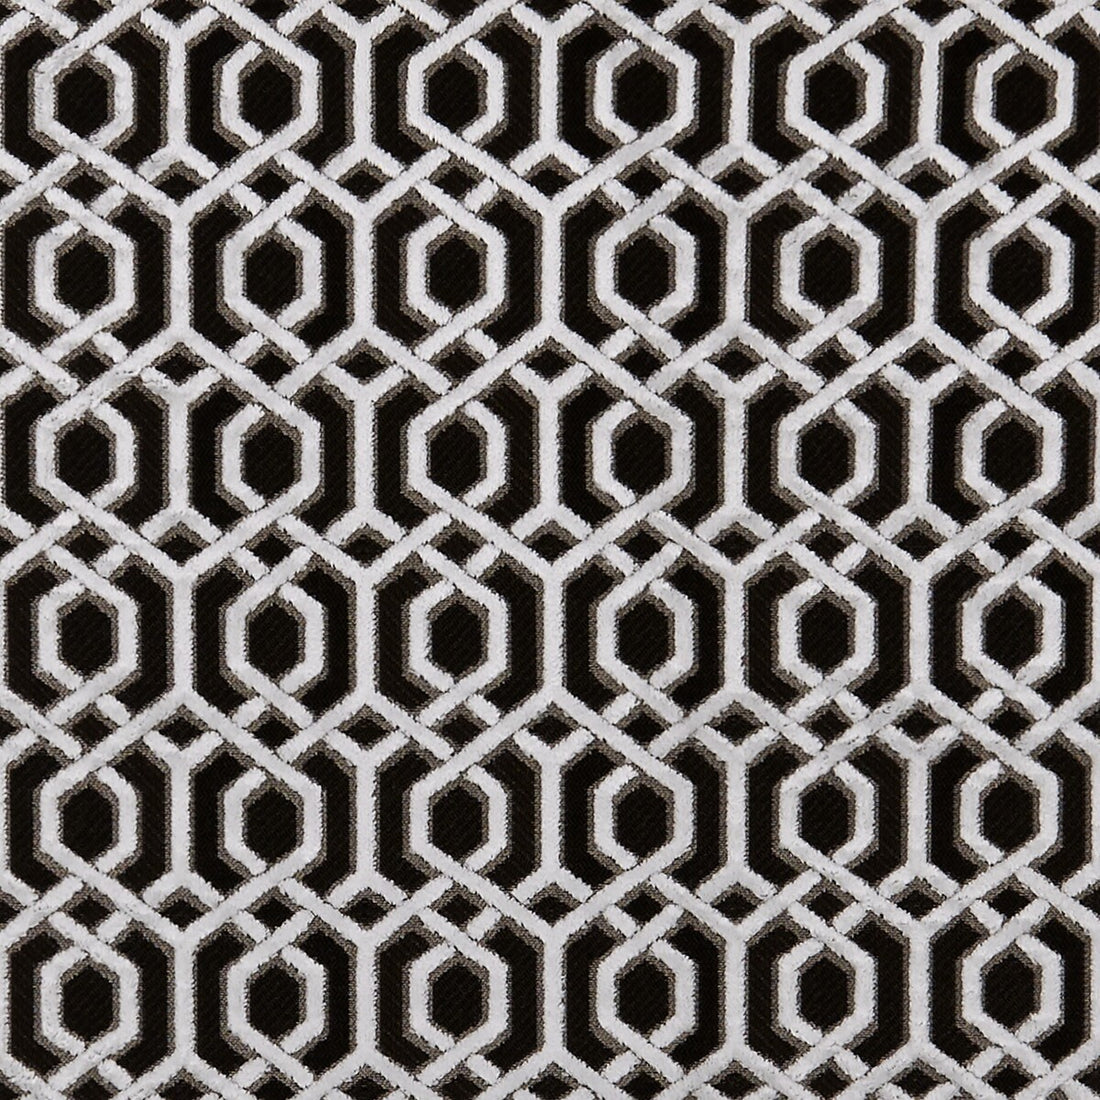 Bw1042 fabric in black/white color - pattern F0944/01.CAC.0 - by Clarke And Clarke in the Clarke &amp; Clarke Black + White collection